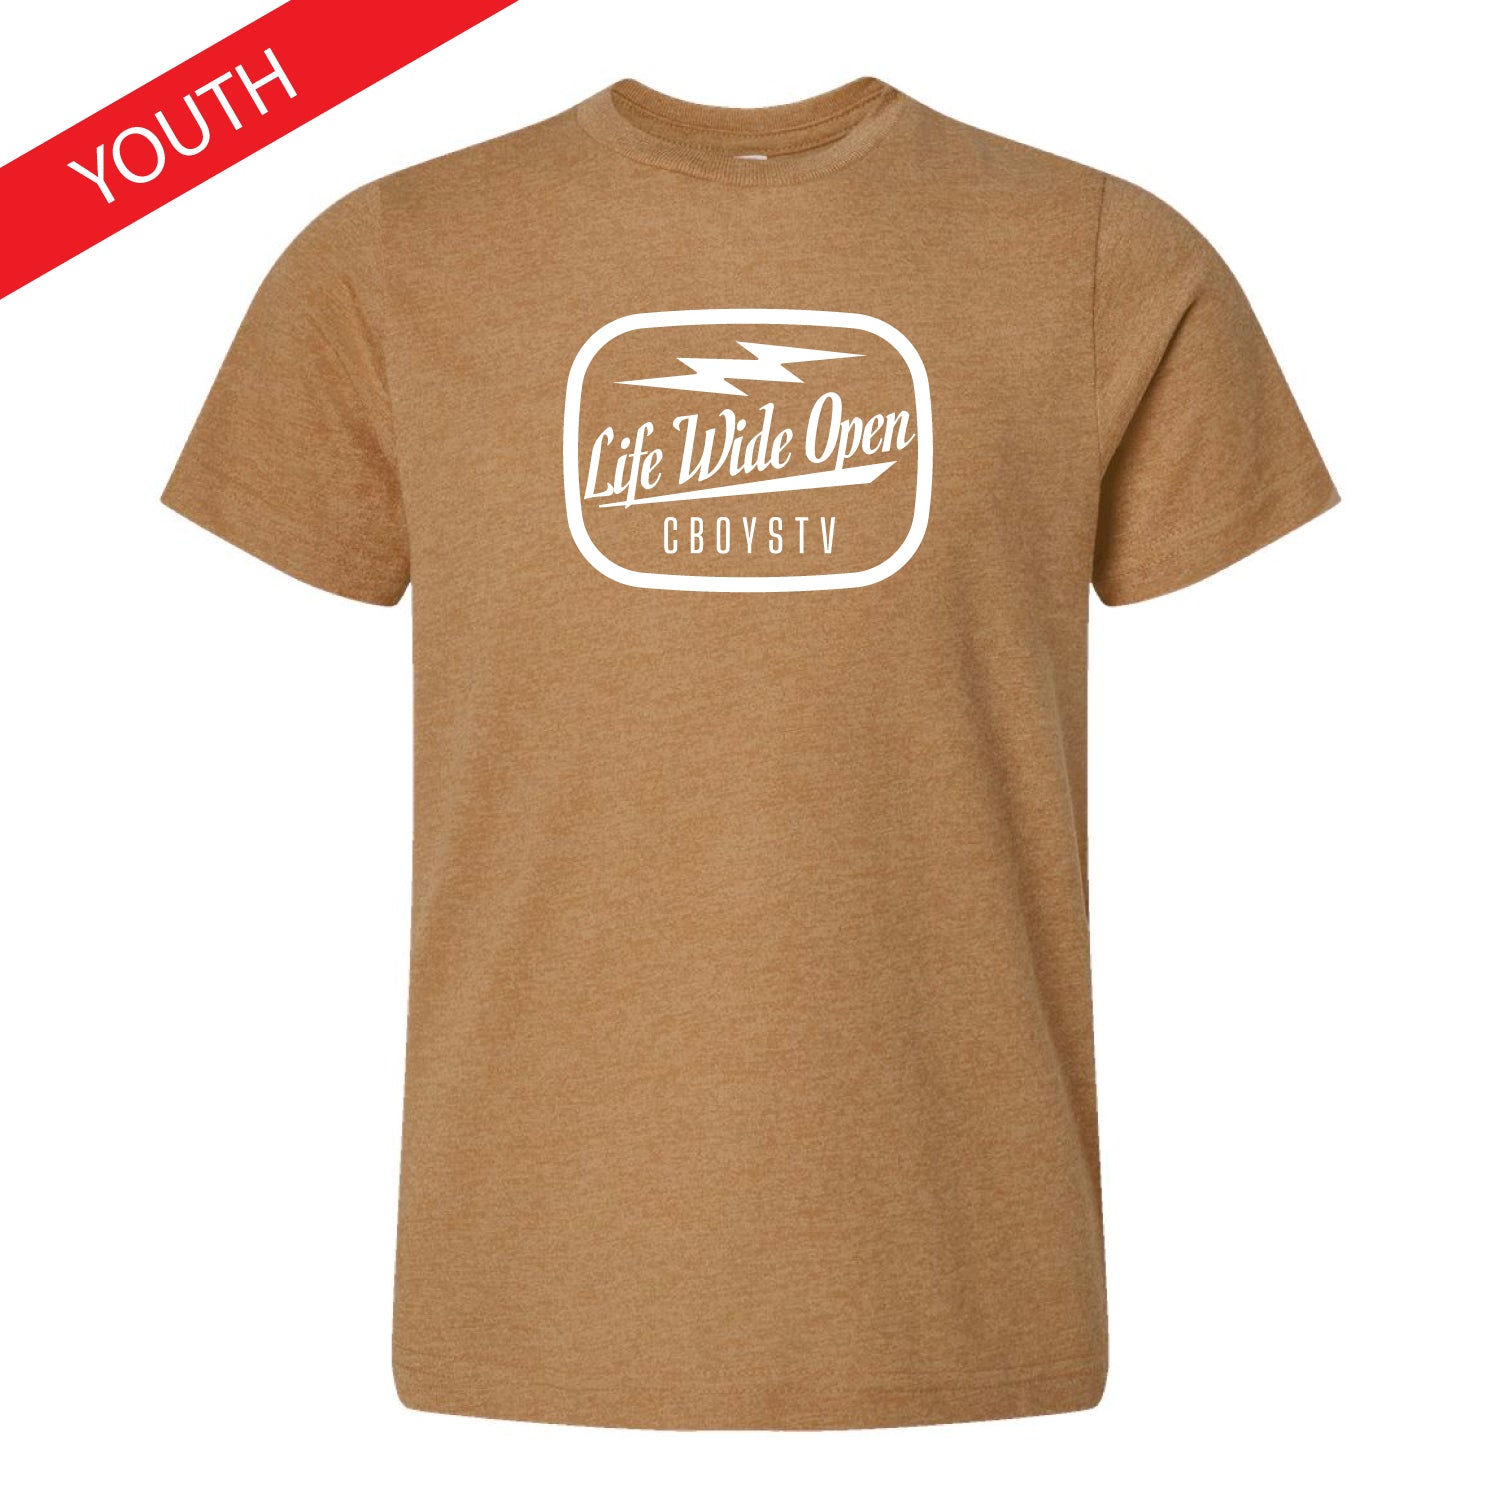 YOUTH - Coyote Brown Milwaukee T-Shirt